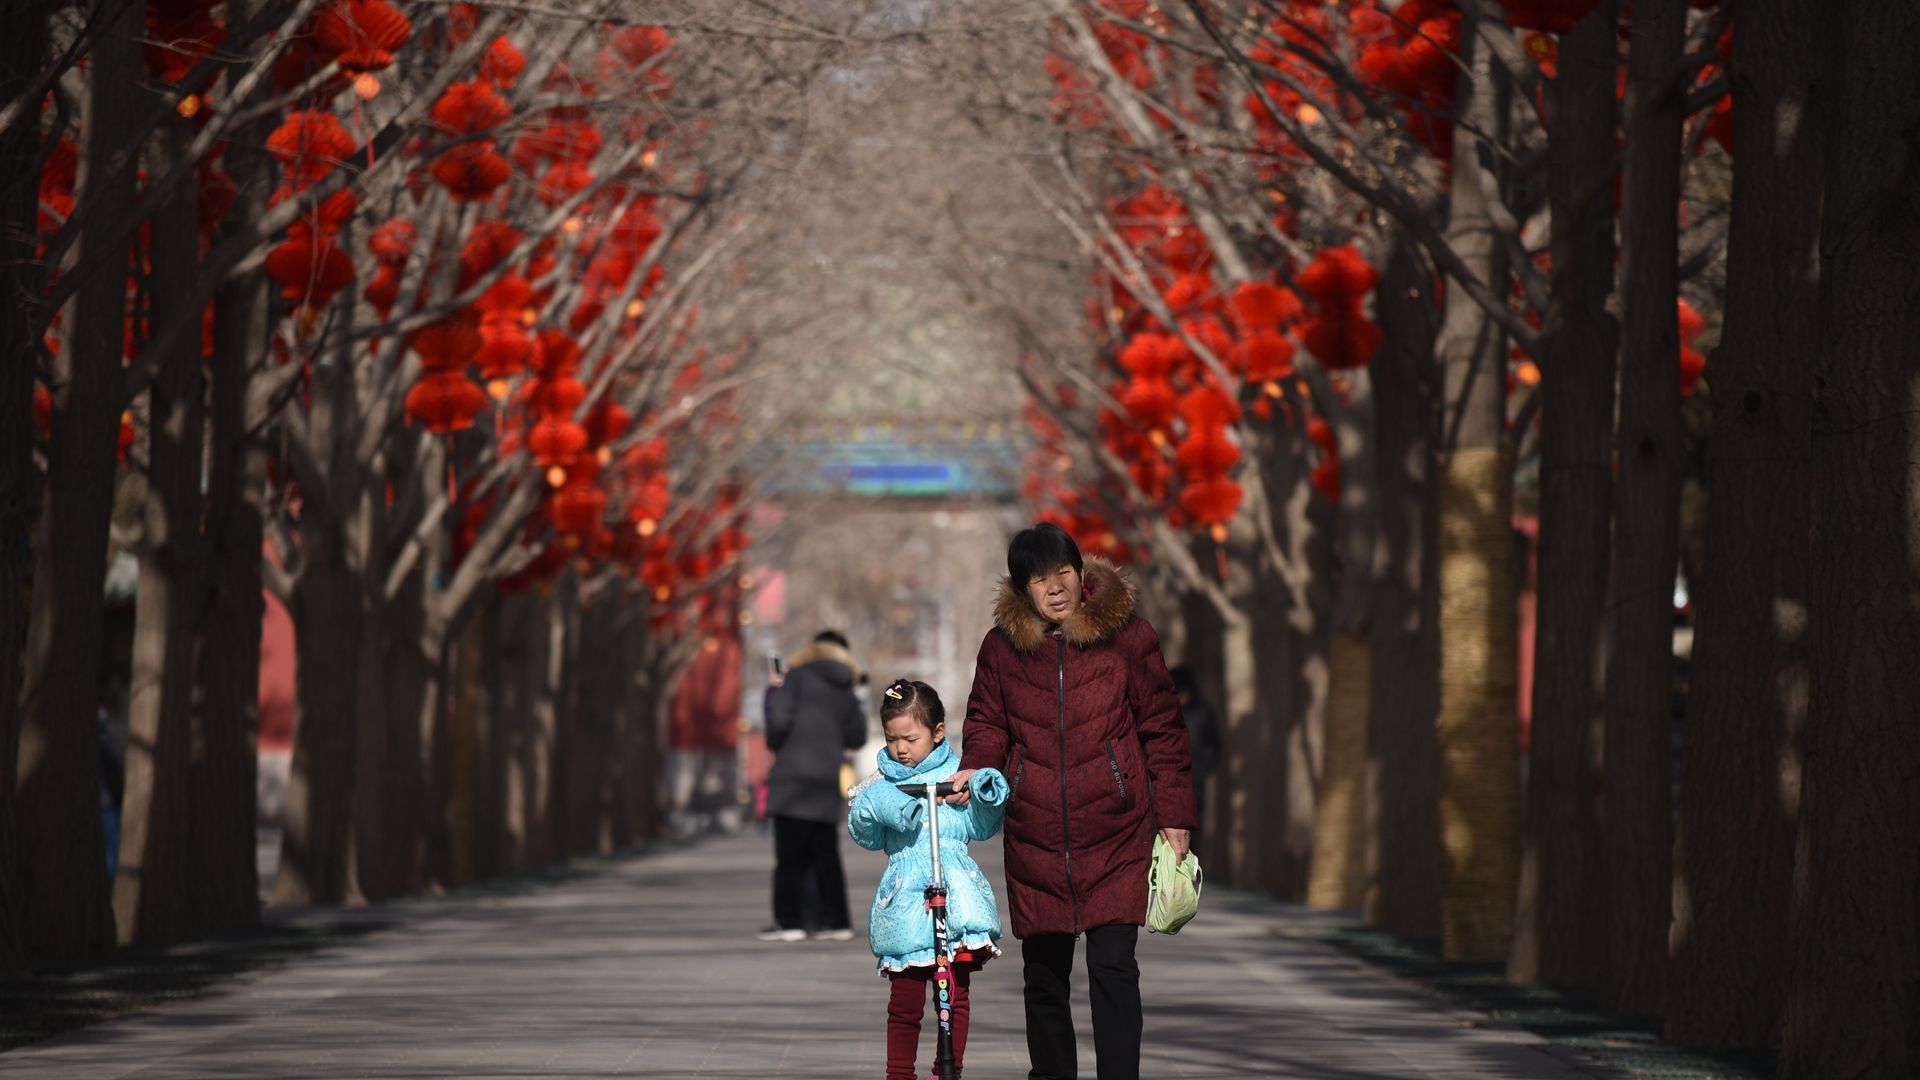 Older woman walking with young child in Beijing park